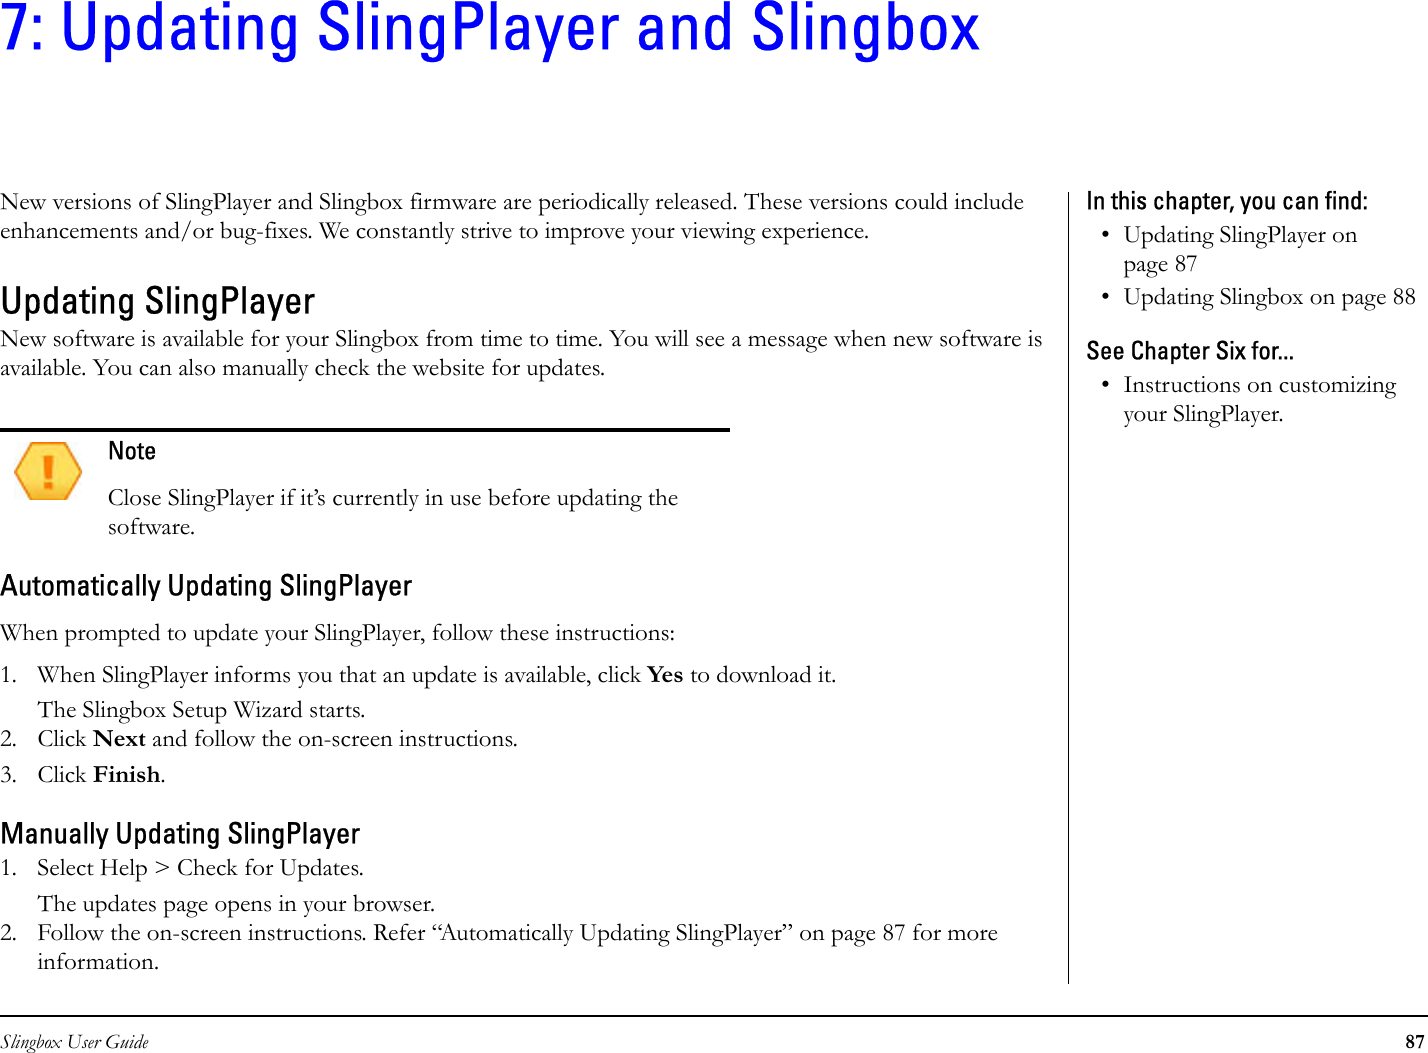 Slingbox User Guide 877: Updating SlingPlayer and SlingboxNew versions of SlingPlayer and Slingbox firmware are periodically released. These versions could include enhancements and/or bug-fixes. We constantly strive to improve your viewing experience.Updating SlingPlayer New software is available for your Slingbox from time to time. You will see a message when new software is available. You can also manually check the website for updates. Automatically Updating SlingPlayerWhen prompted to update your SlingPlayer, follow these instructions:1. When SlingPlayer informs you that an update is available, click Yes to download it.The Slingbox Setup Wizard starts.2. Click Next and follow the on-screen instructions. 3. Click Finish.Manually Updating SlingPlayer1. Select Help &gt; Check for Updates.The updates page opens in your browser. 2. Follow the on-screen instructions. Refer “Automatically Updating SlingPlayer” on page 87 for more information.NoteClose SlingPlayer if it’s currently in use before updating the software. In this chapter, you can find: • Updating SlingPlayer on page 87• Updating Slingbox on page 88See Chapter Six for...• Instructions on customizing your SlingPlayer.